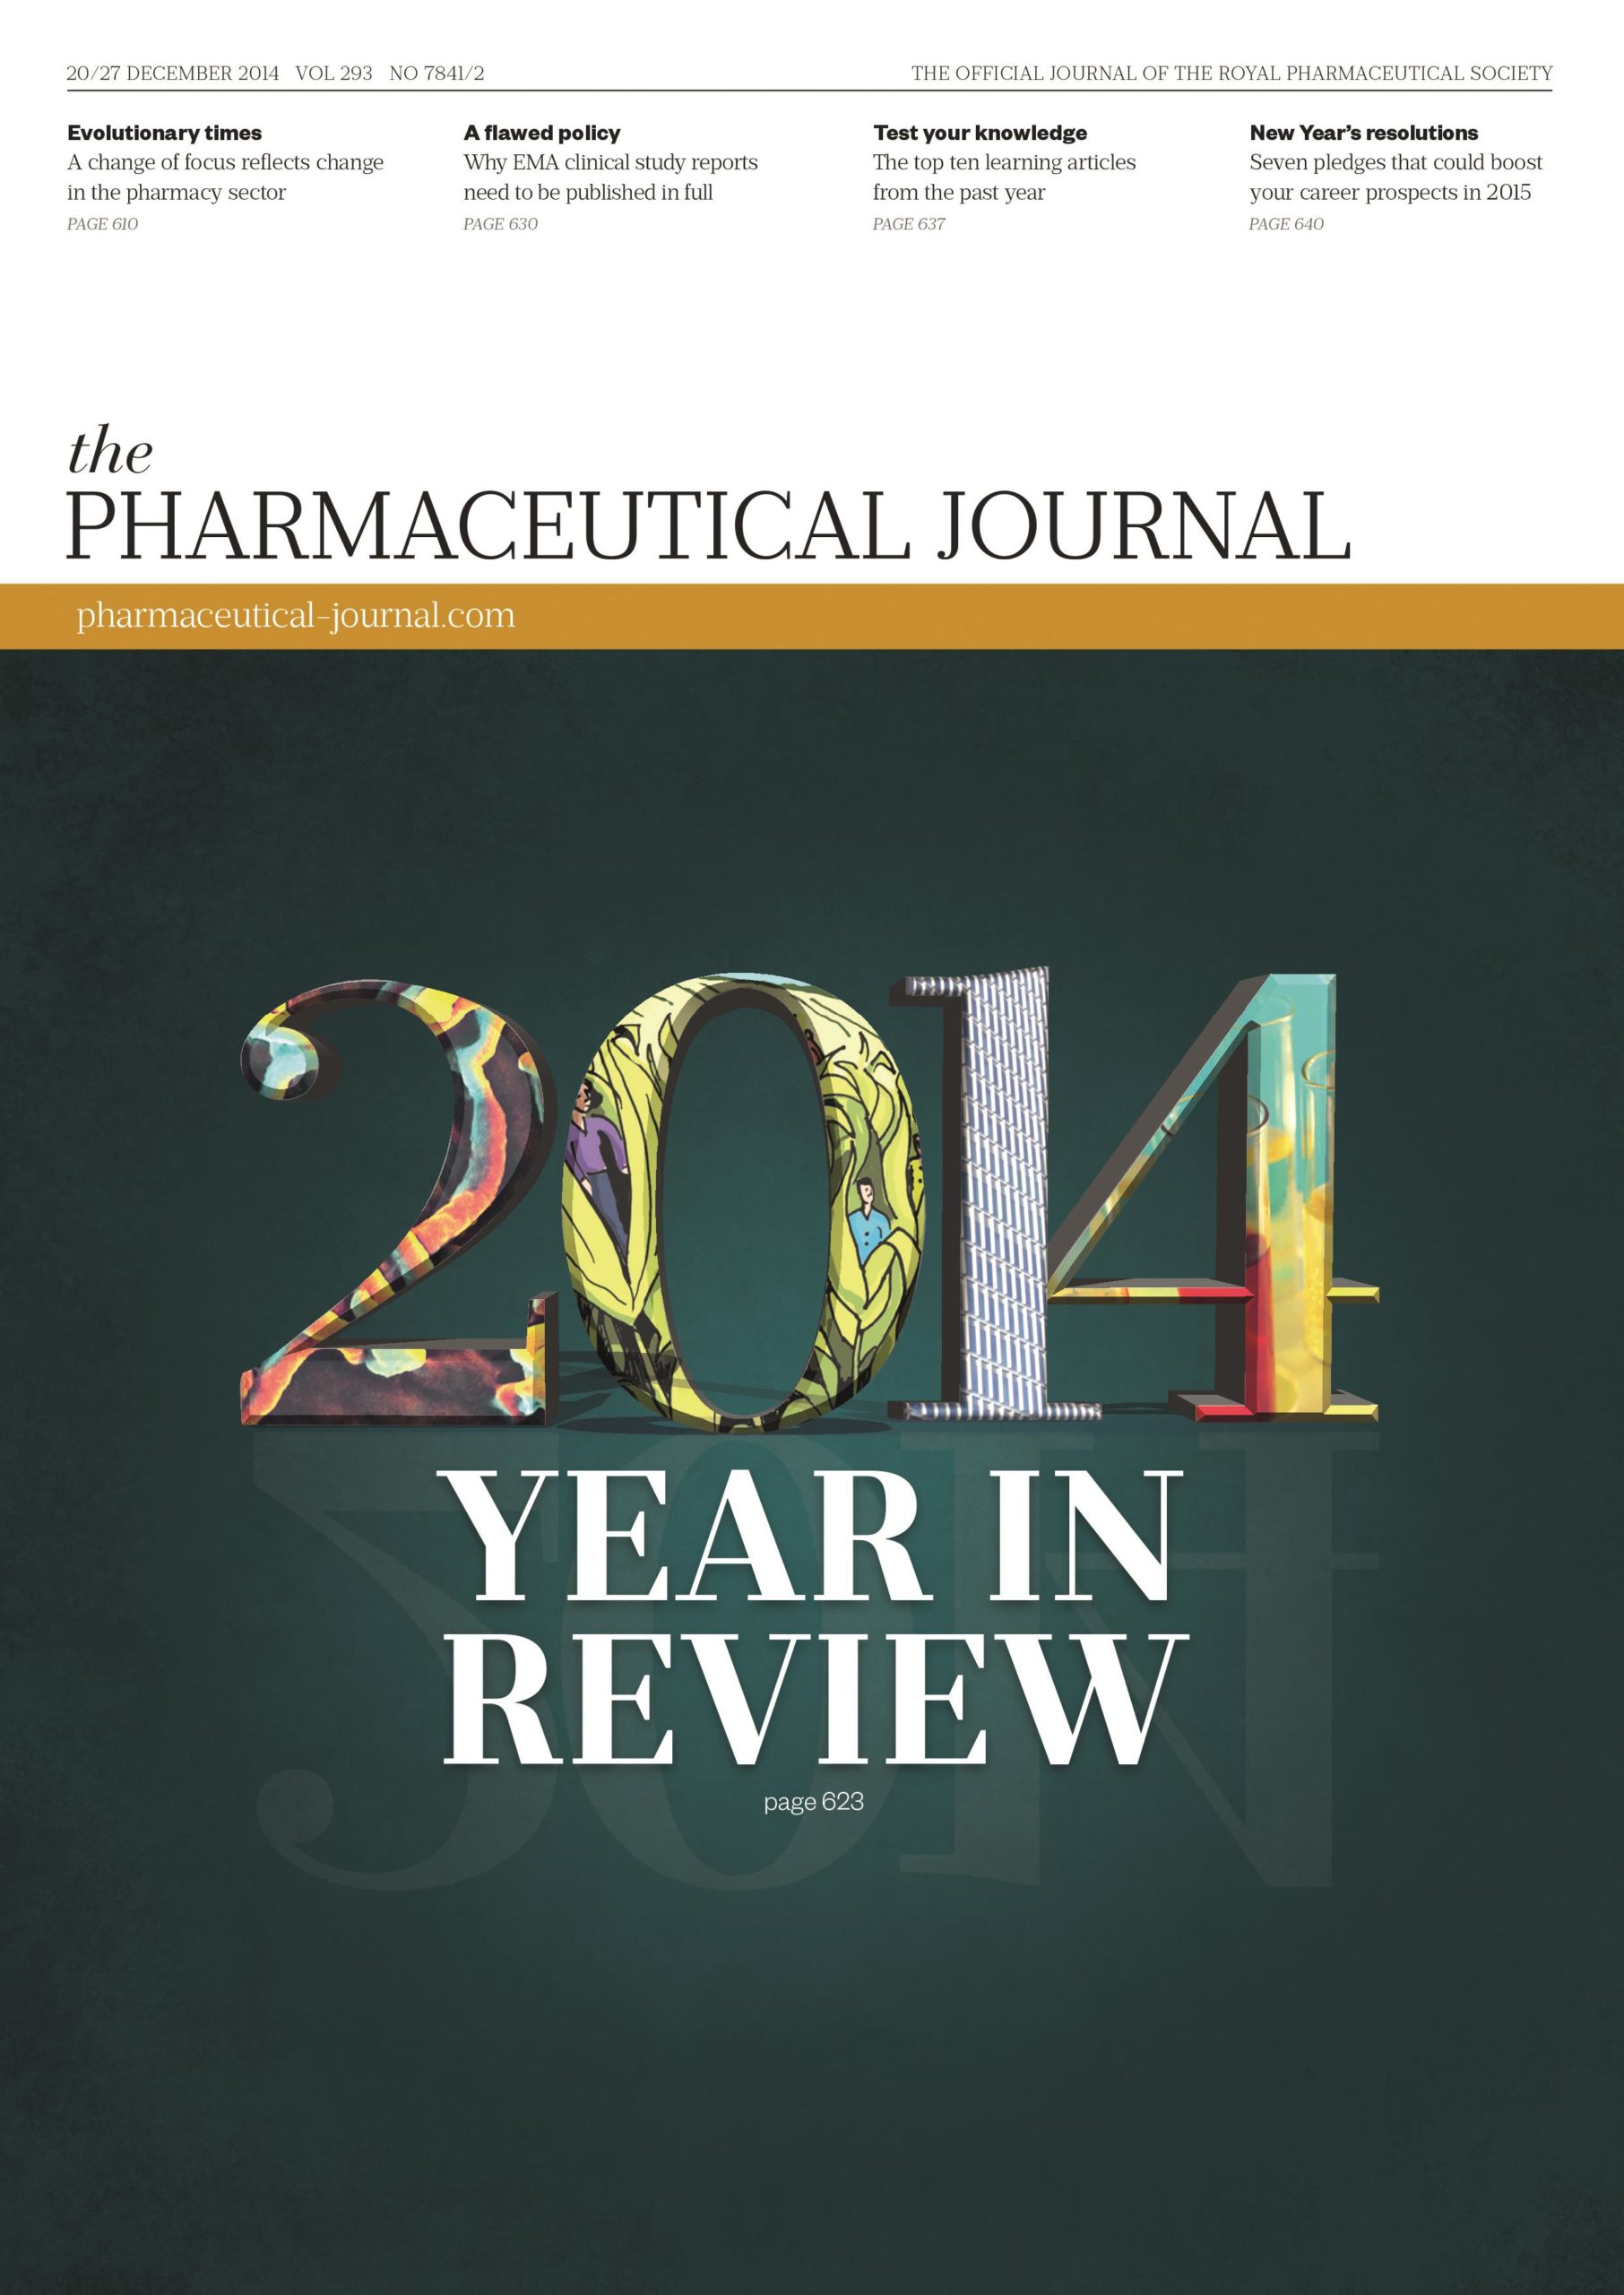 Publication issue cover for PJ, 20/27 December 2014, Vol 293, No 7841/2